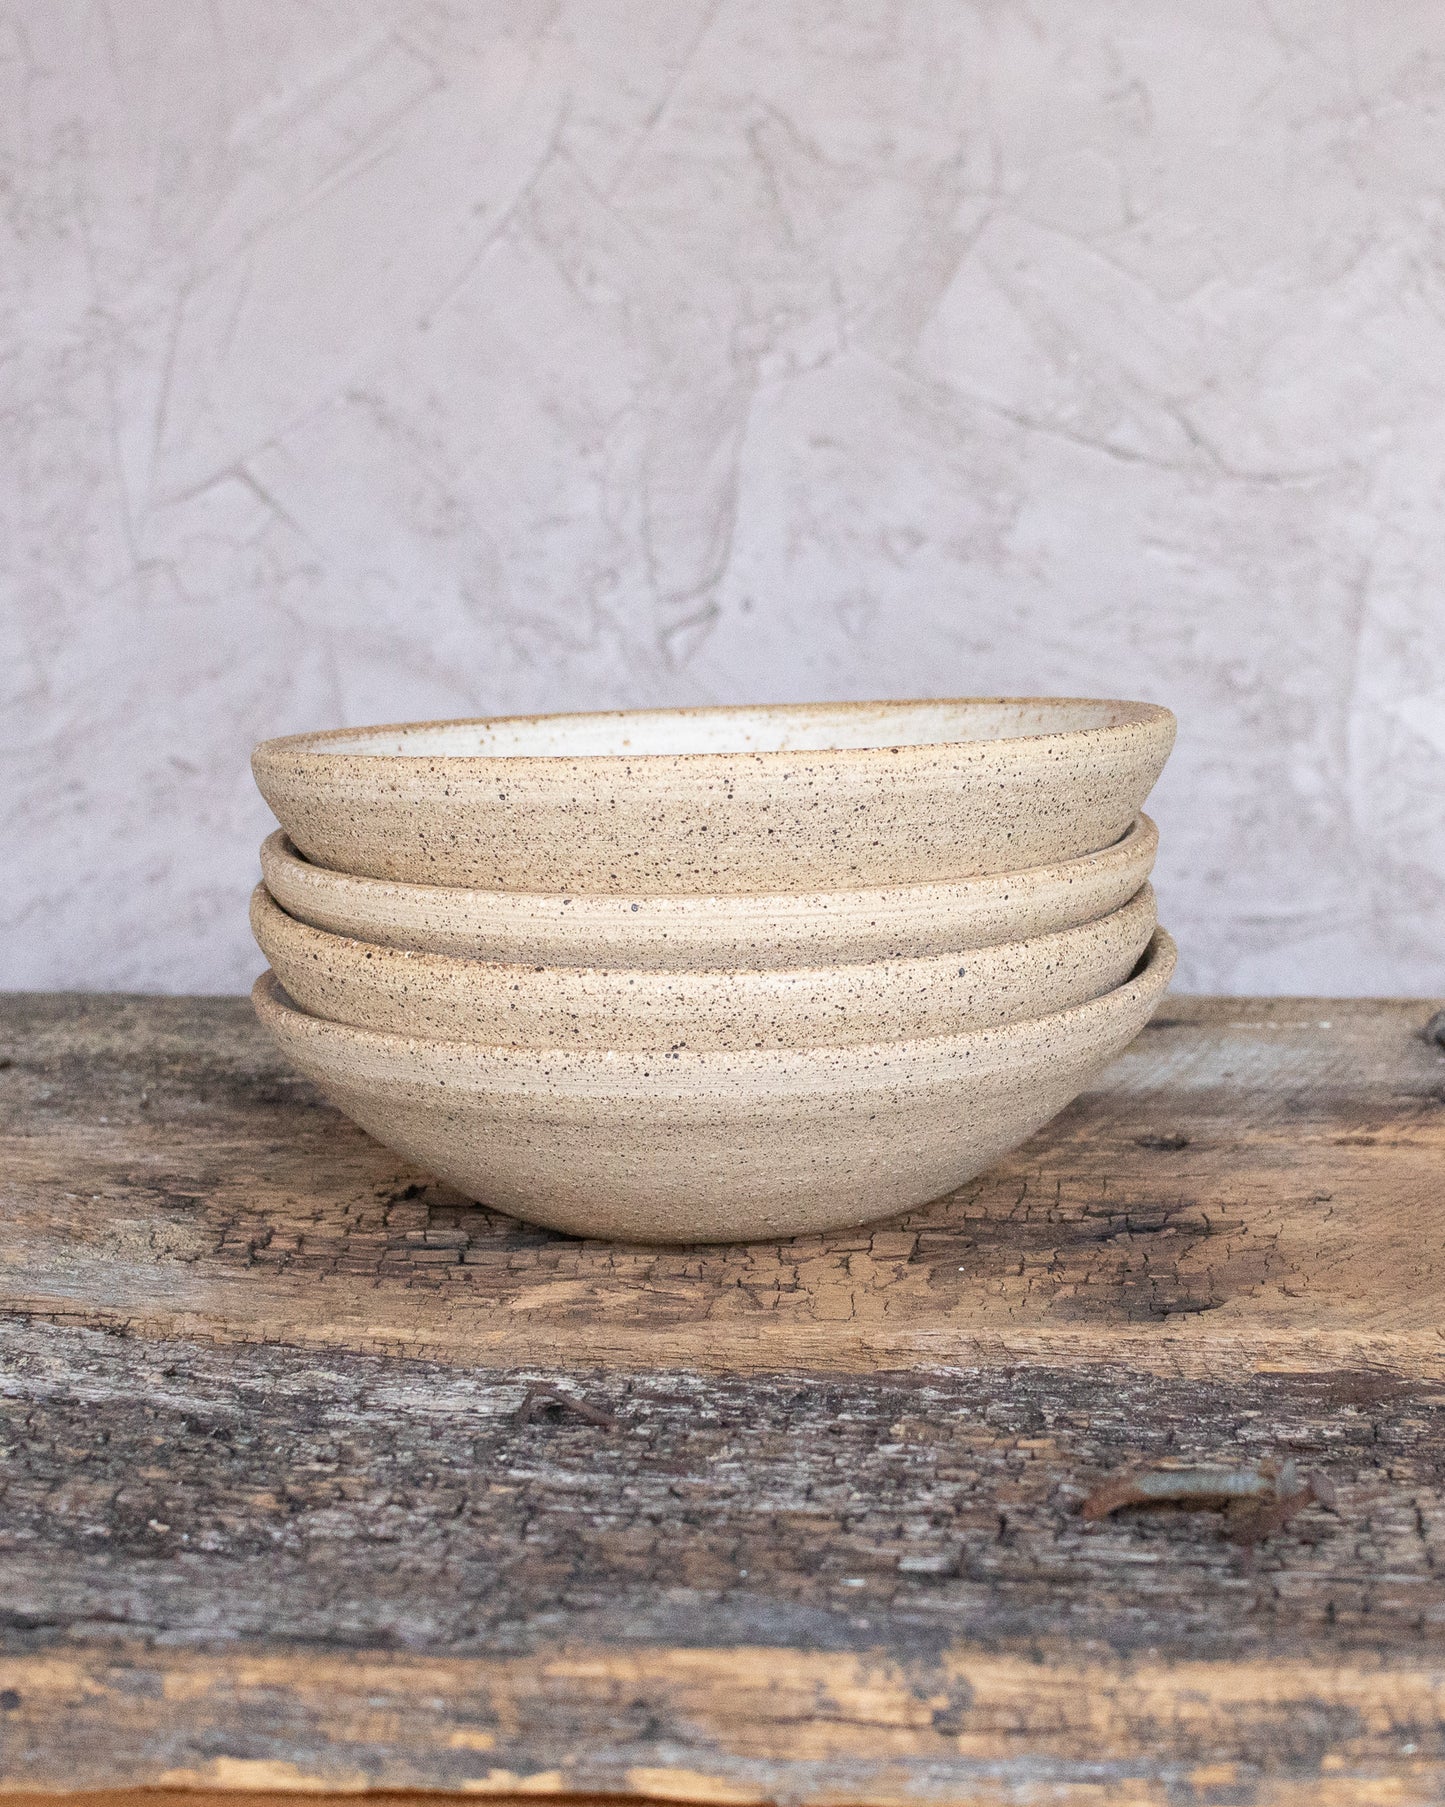 Second Quality: Shallow Breakfast Bowl in Brush Stroke over Stoneware